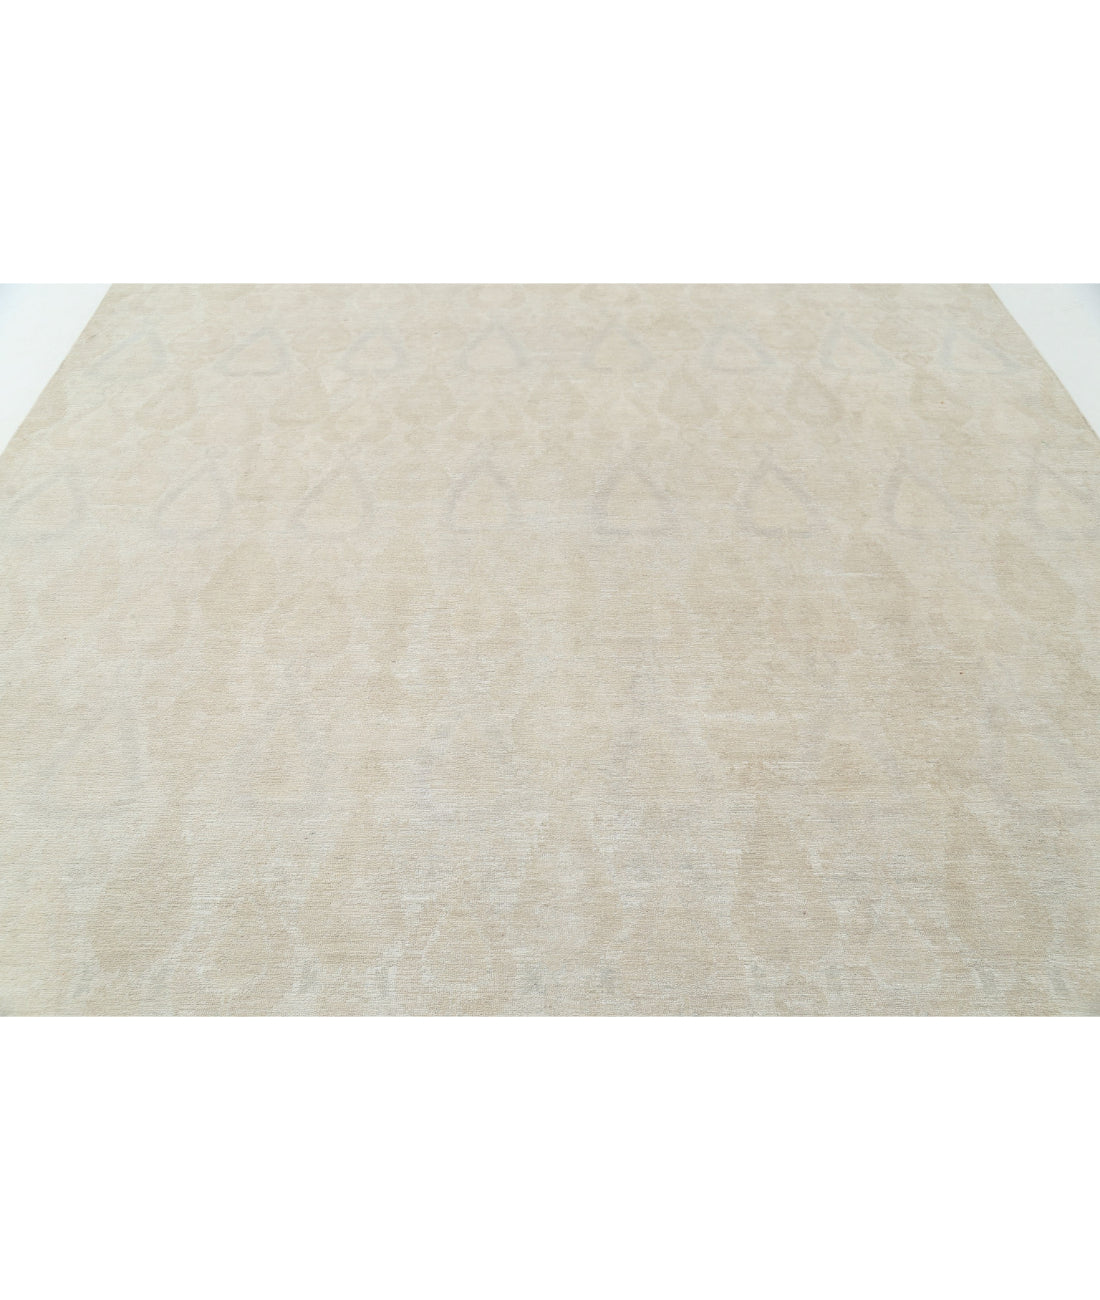 Hand Knotted Ikat Wool Rug - 8'10'' x 11'5'' 8'10'' x 11'5'' (265 X 343) / Ivory / Taupe